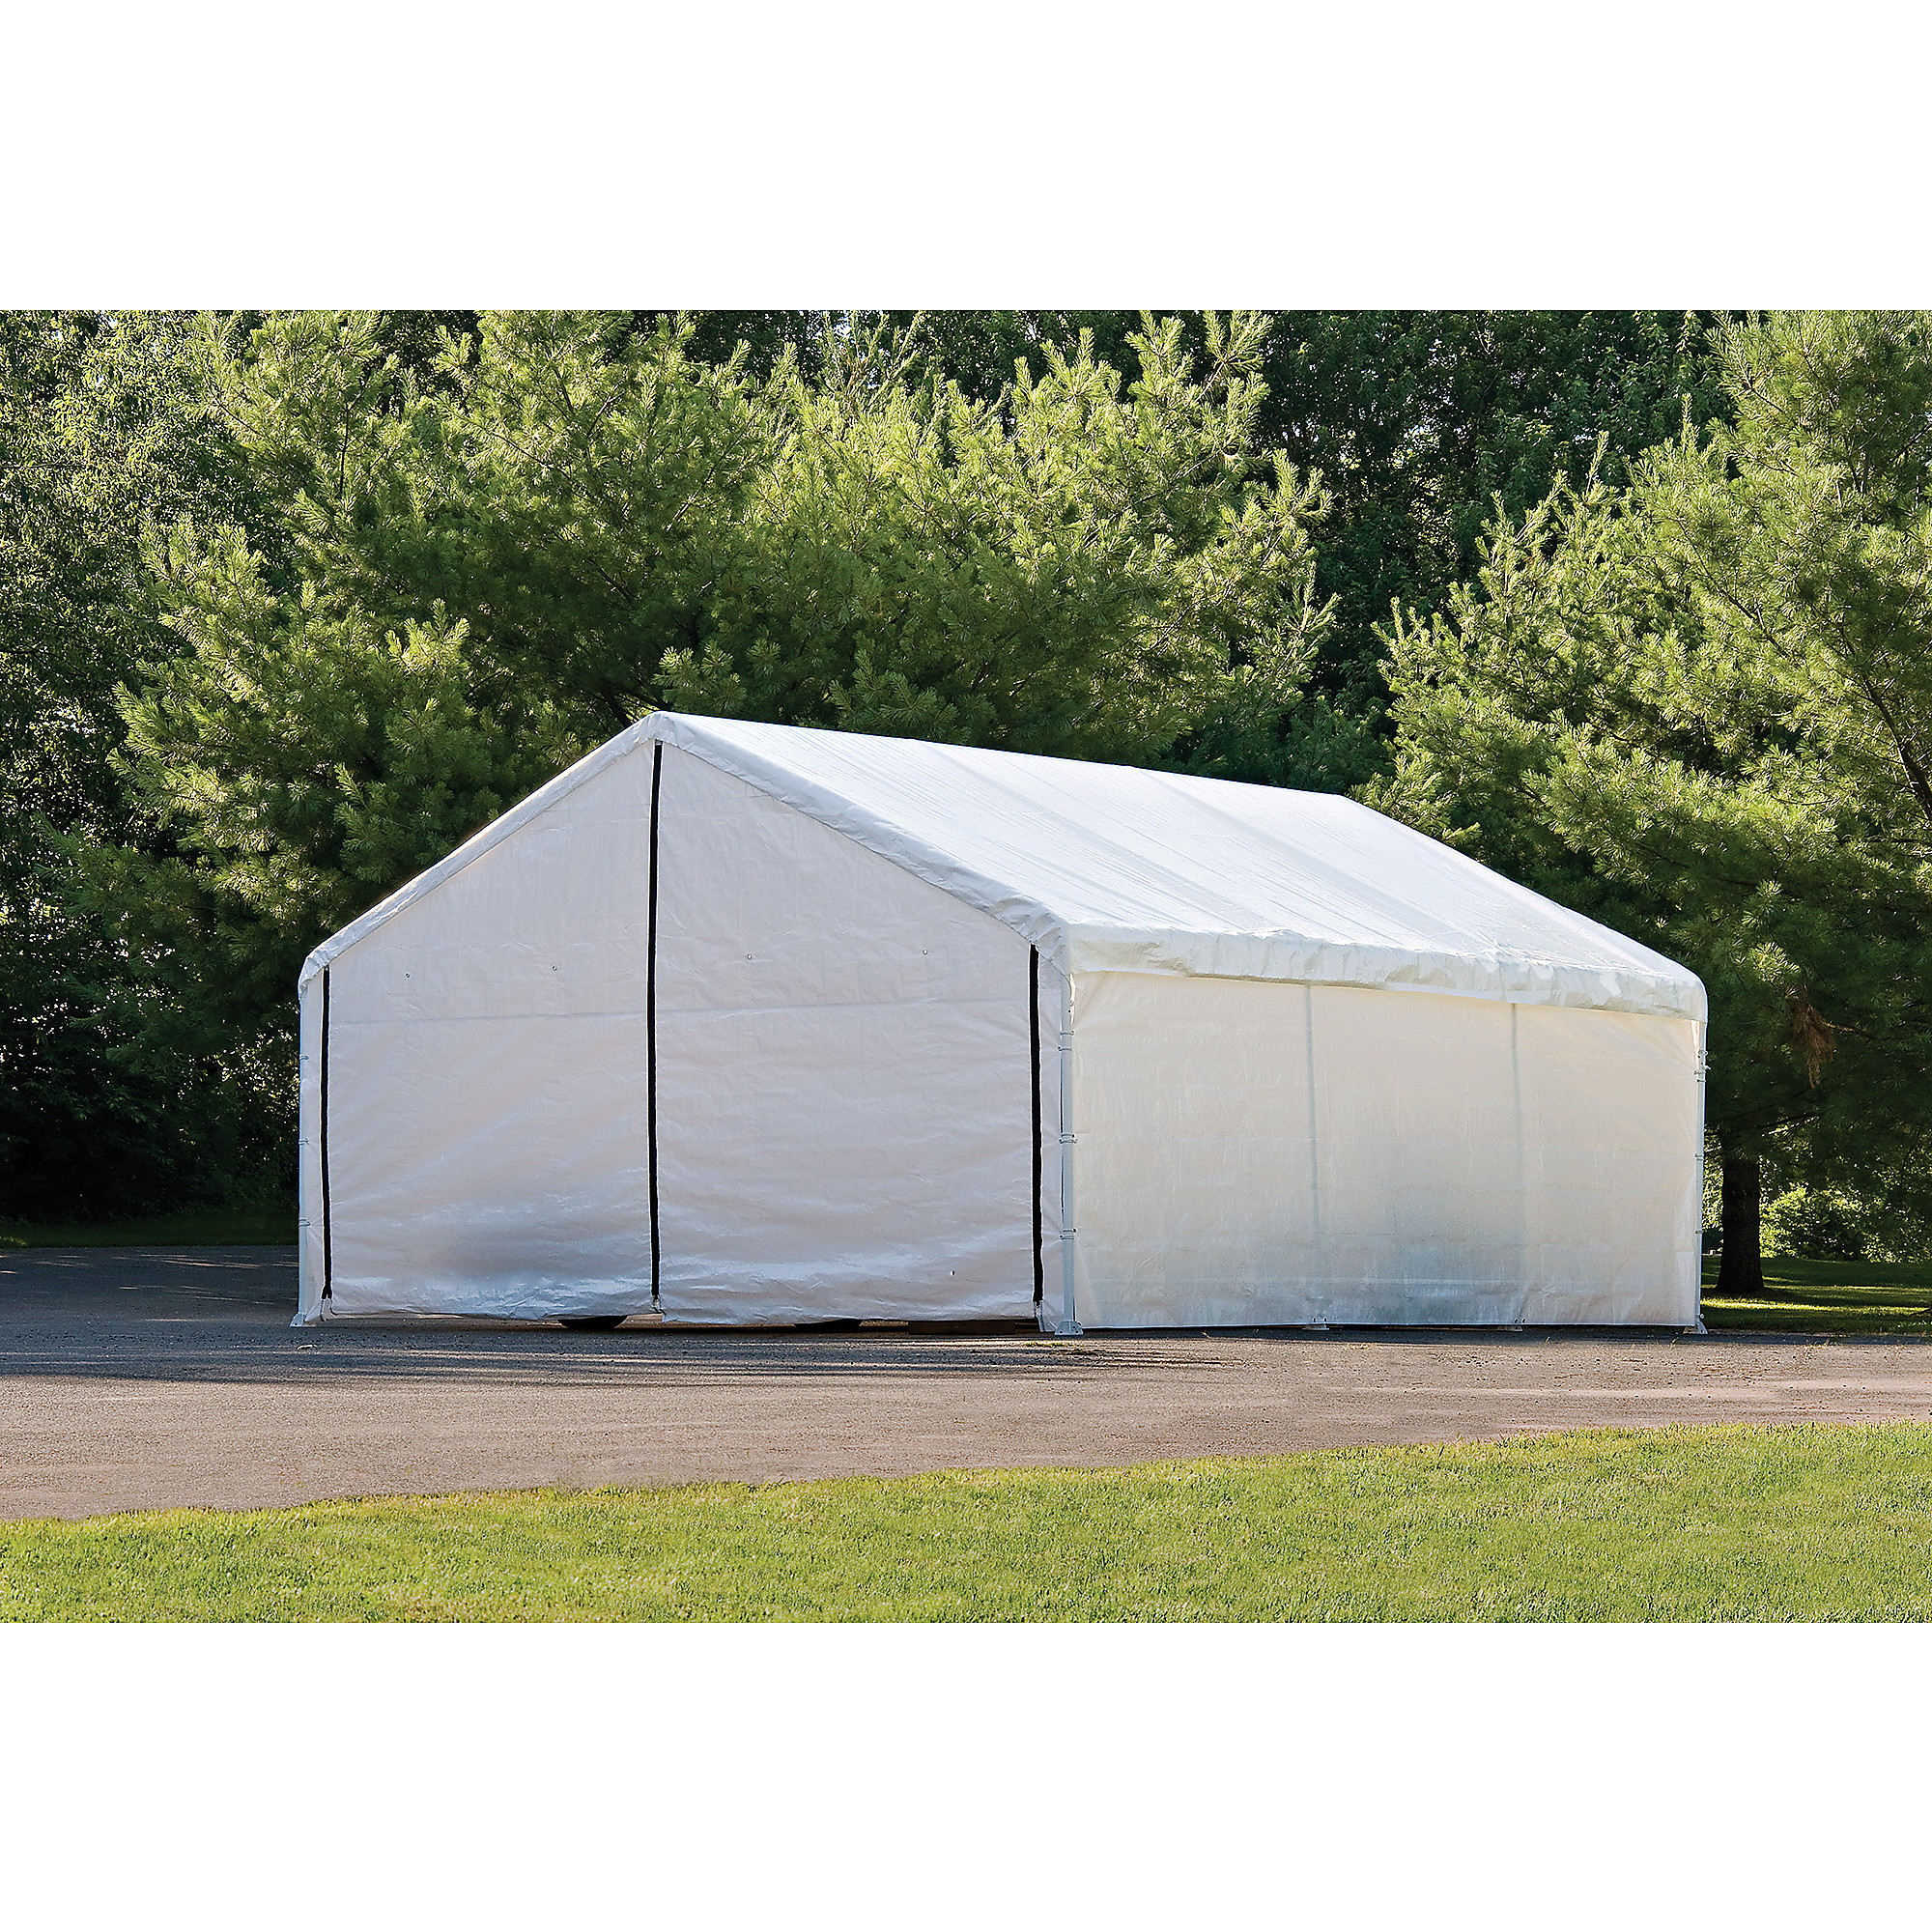 ShelterLogic SuperMax, Canopy Enclosure Kit 18 × 30ft. White (FR Rated -, Fits Canopy Length 30 ft, Fits Canopy Width 18 ft, Material Polyethylene, -  26179